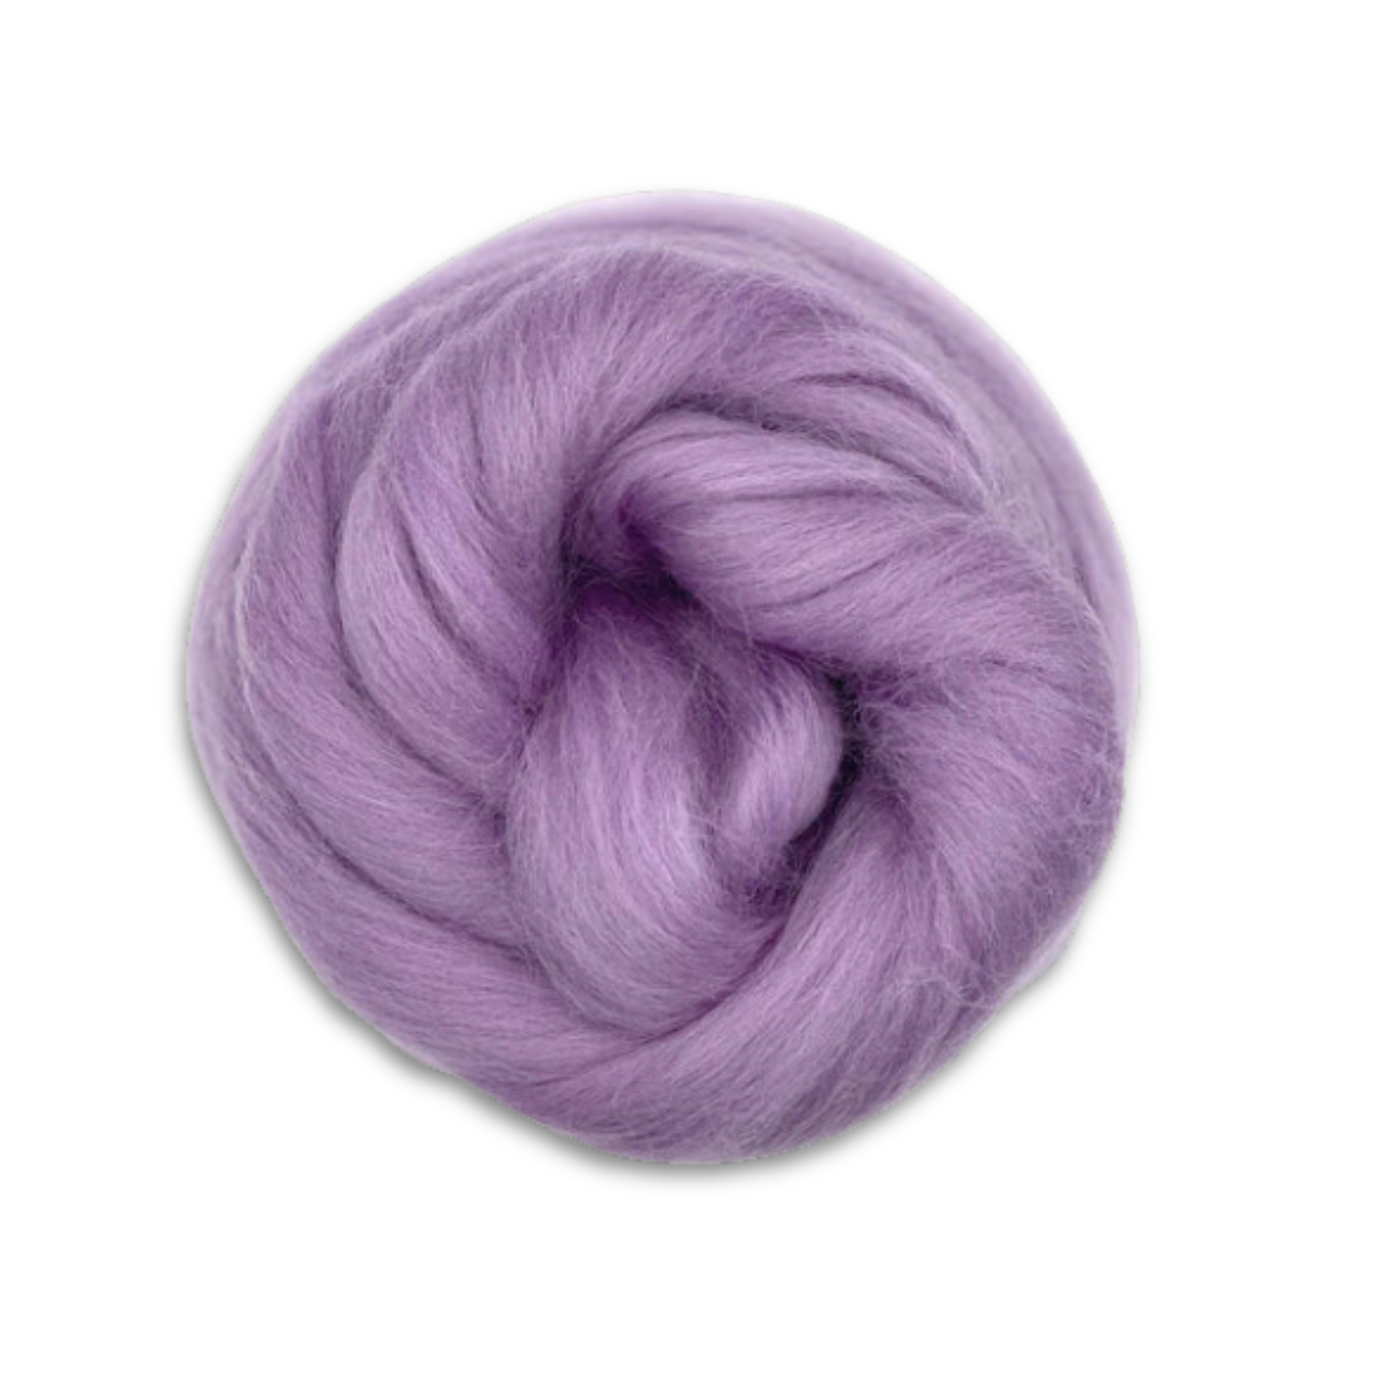 Dyed Corriedale Combed Top Wool